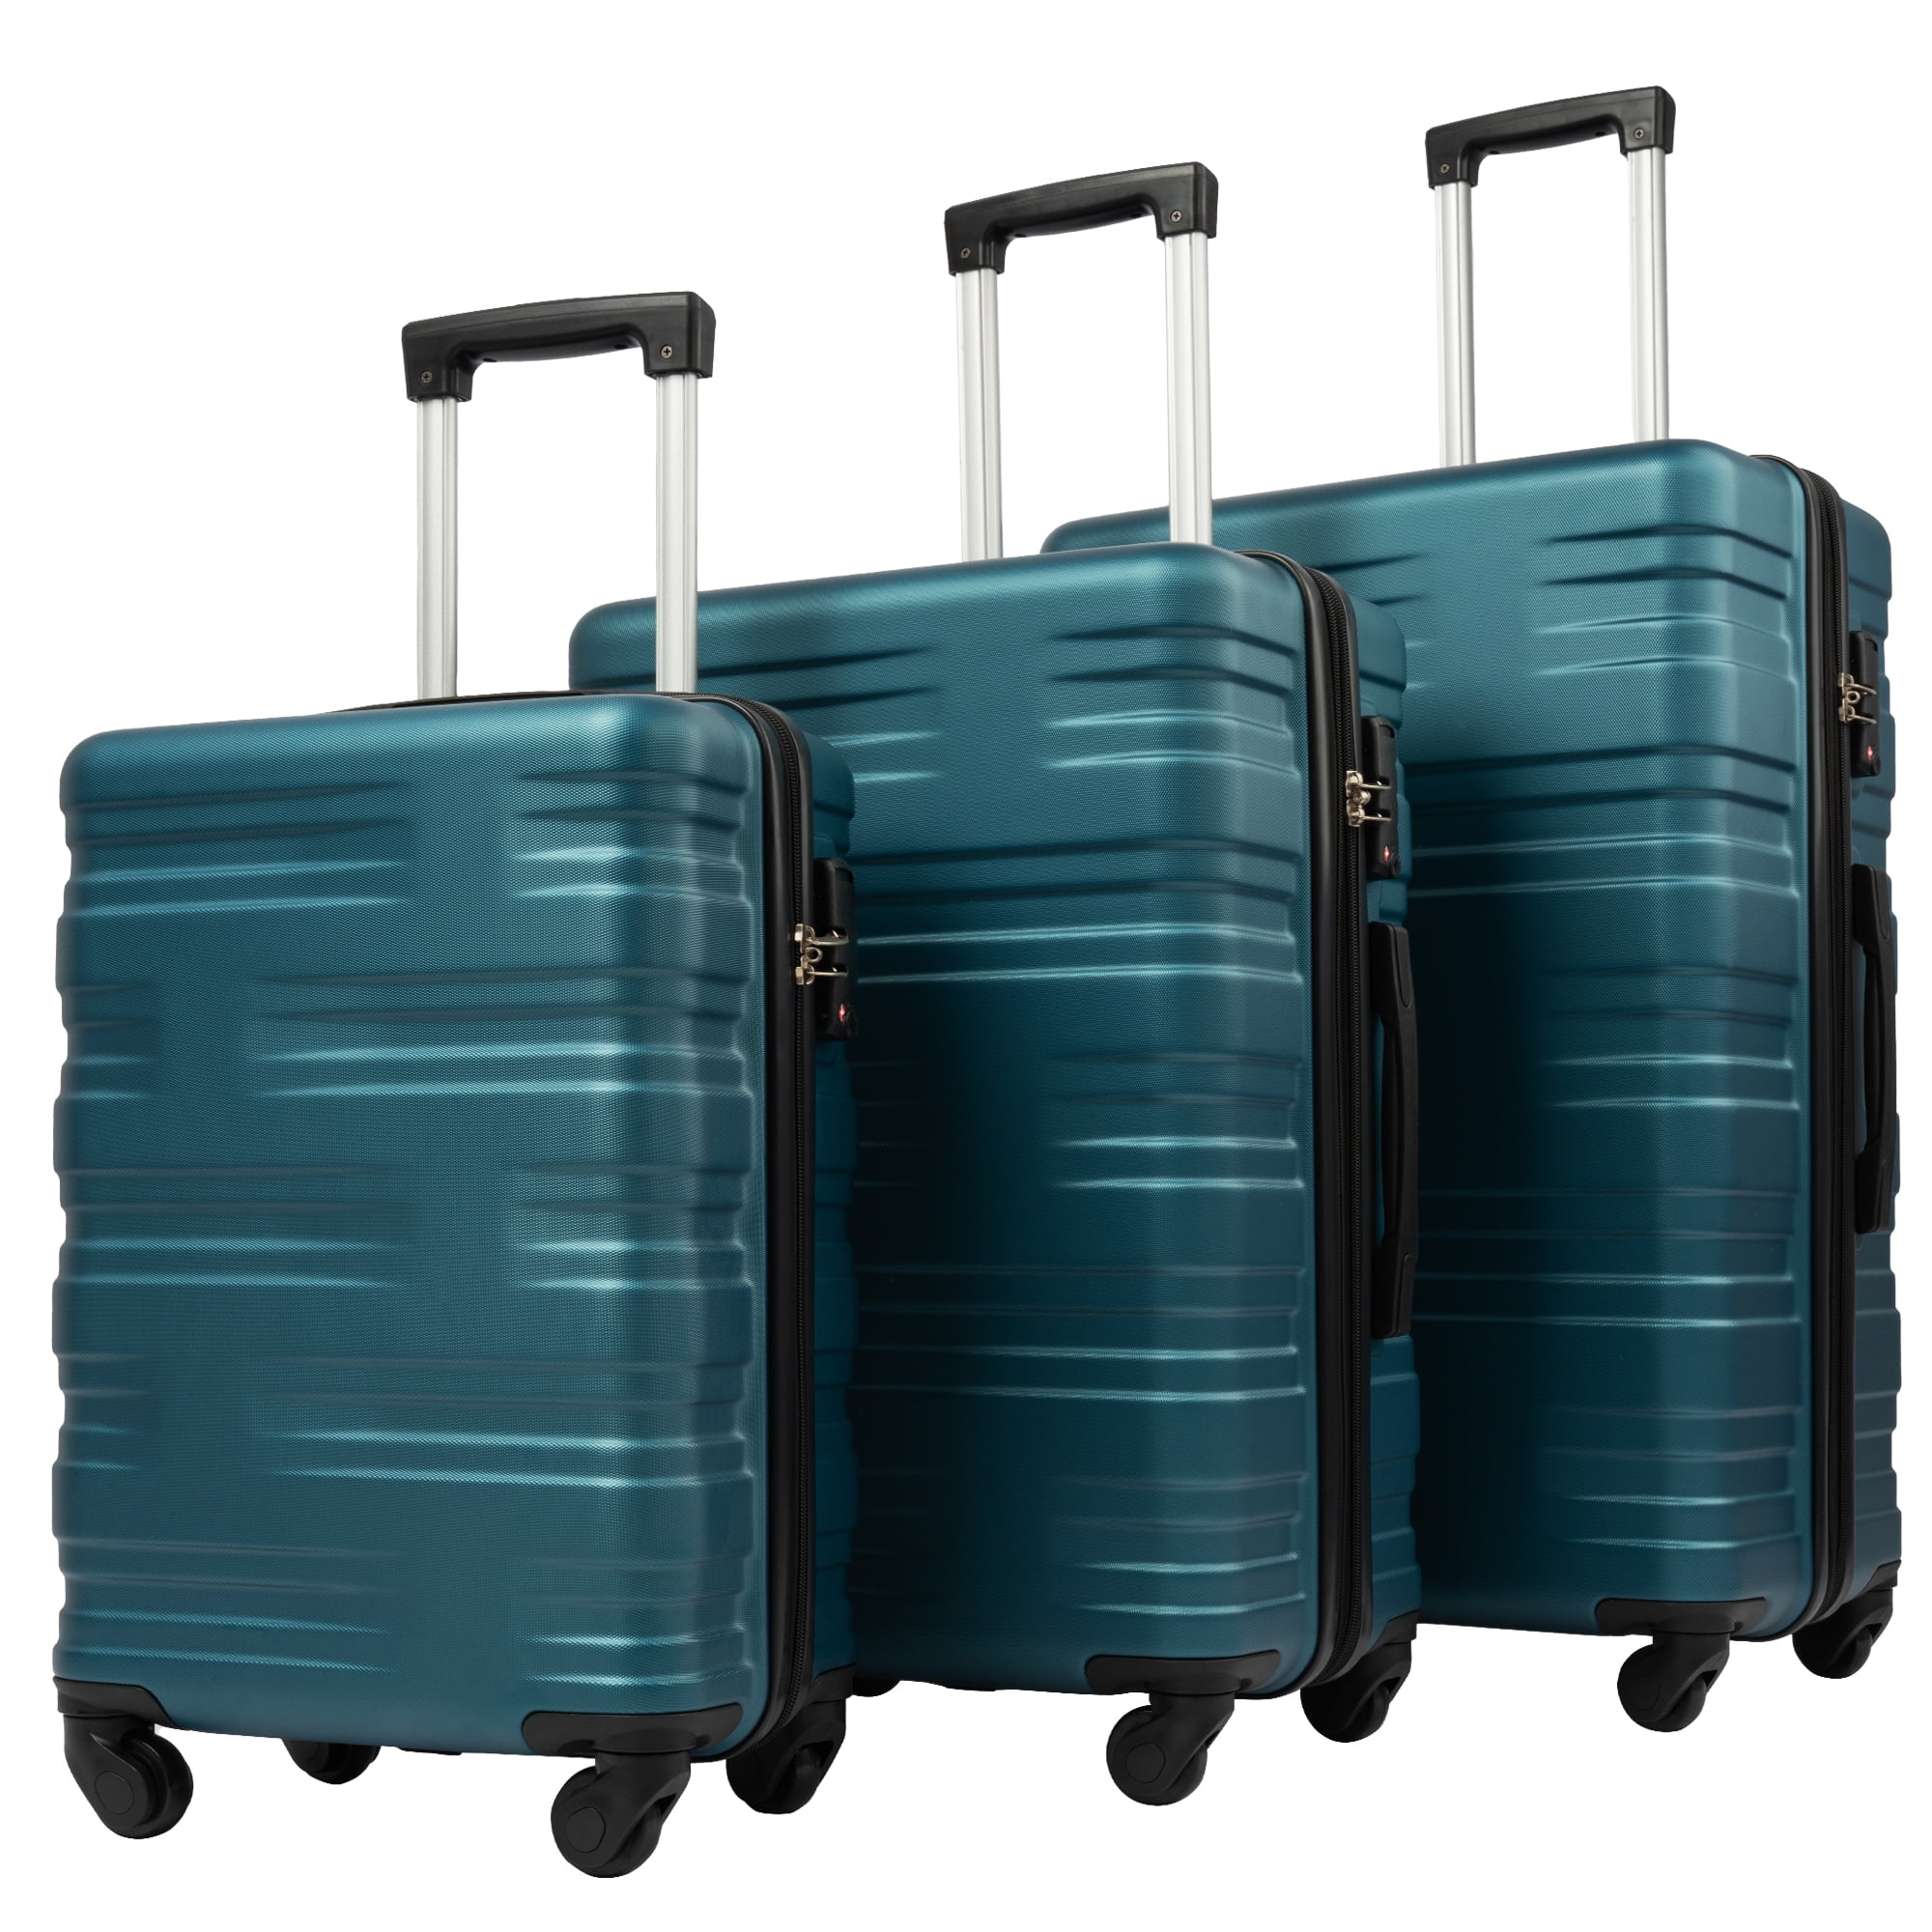 uhomepro 3 In 1 Suitcases with Wheels, Upgrade 20